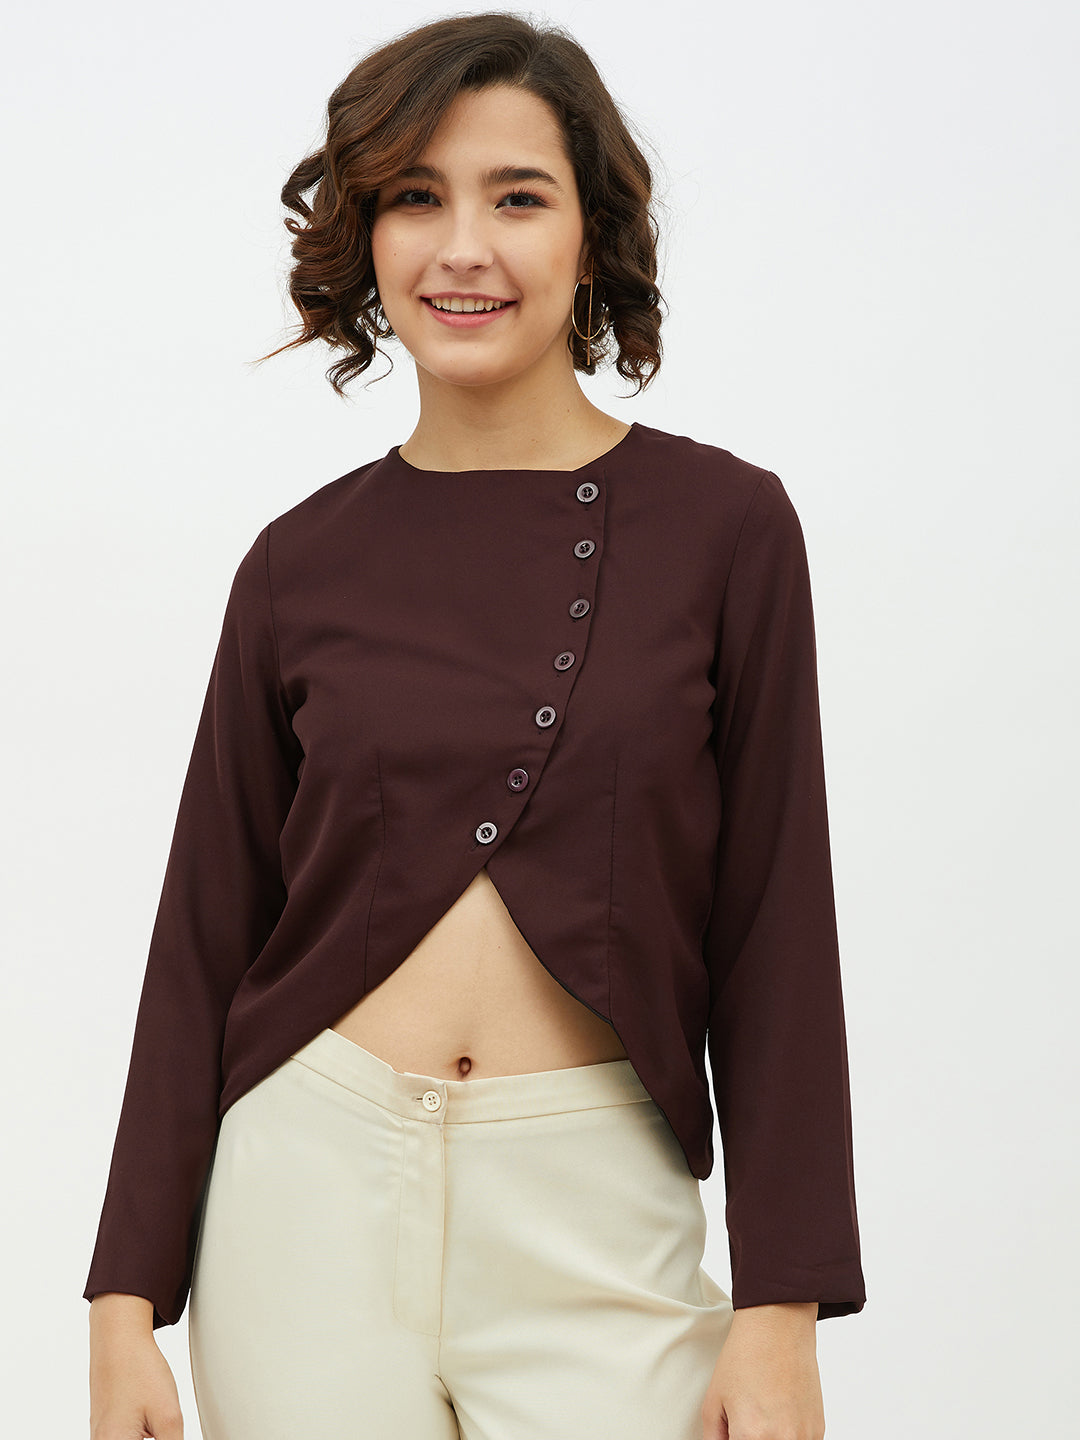 Women's Maroon top with diagonal button top - StyleStone